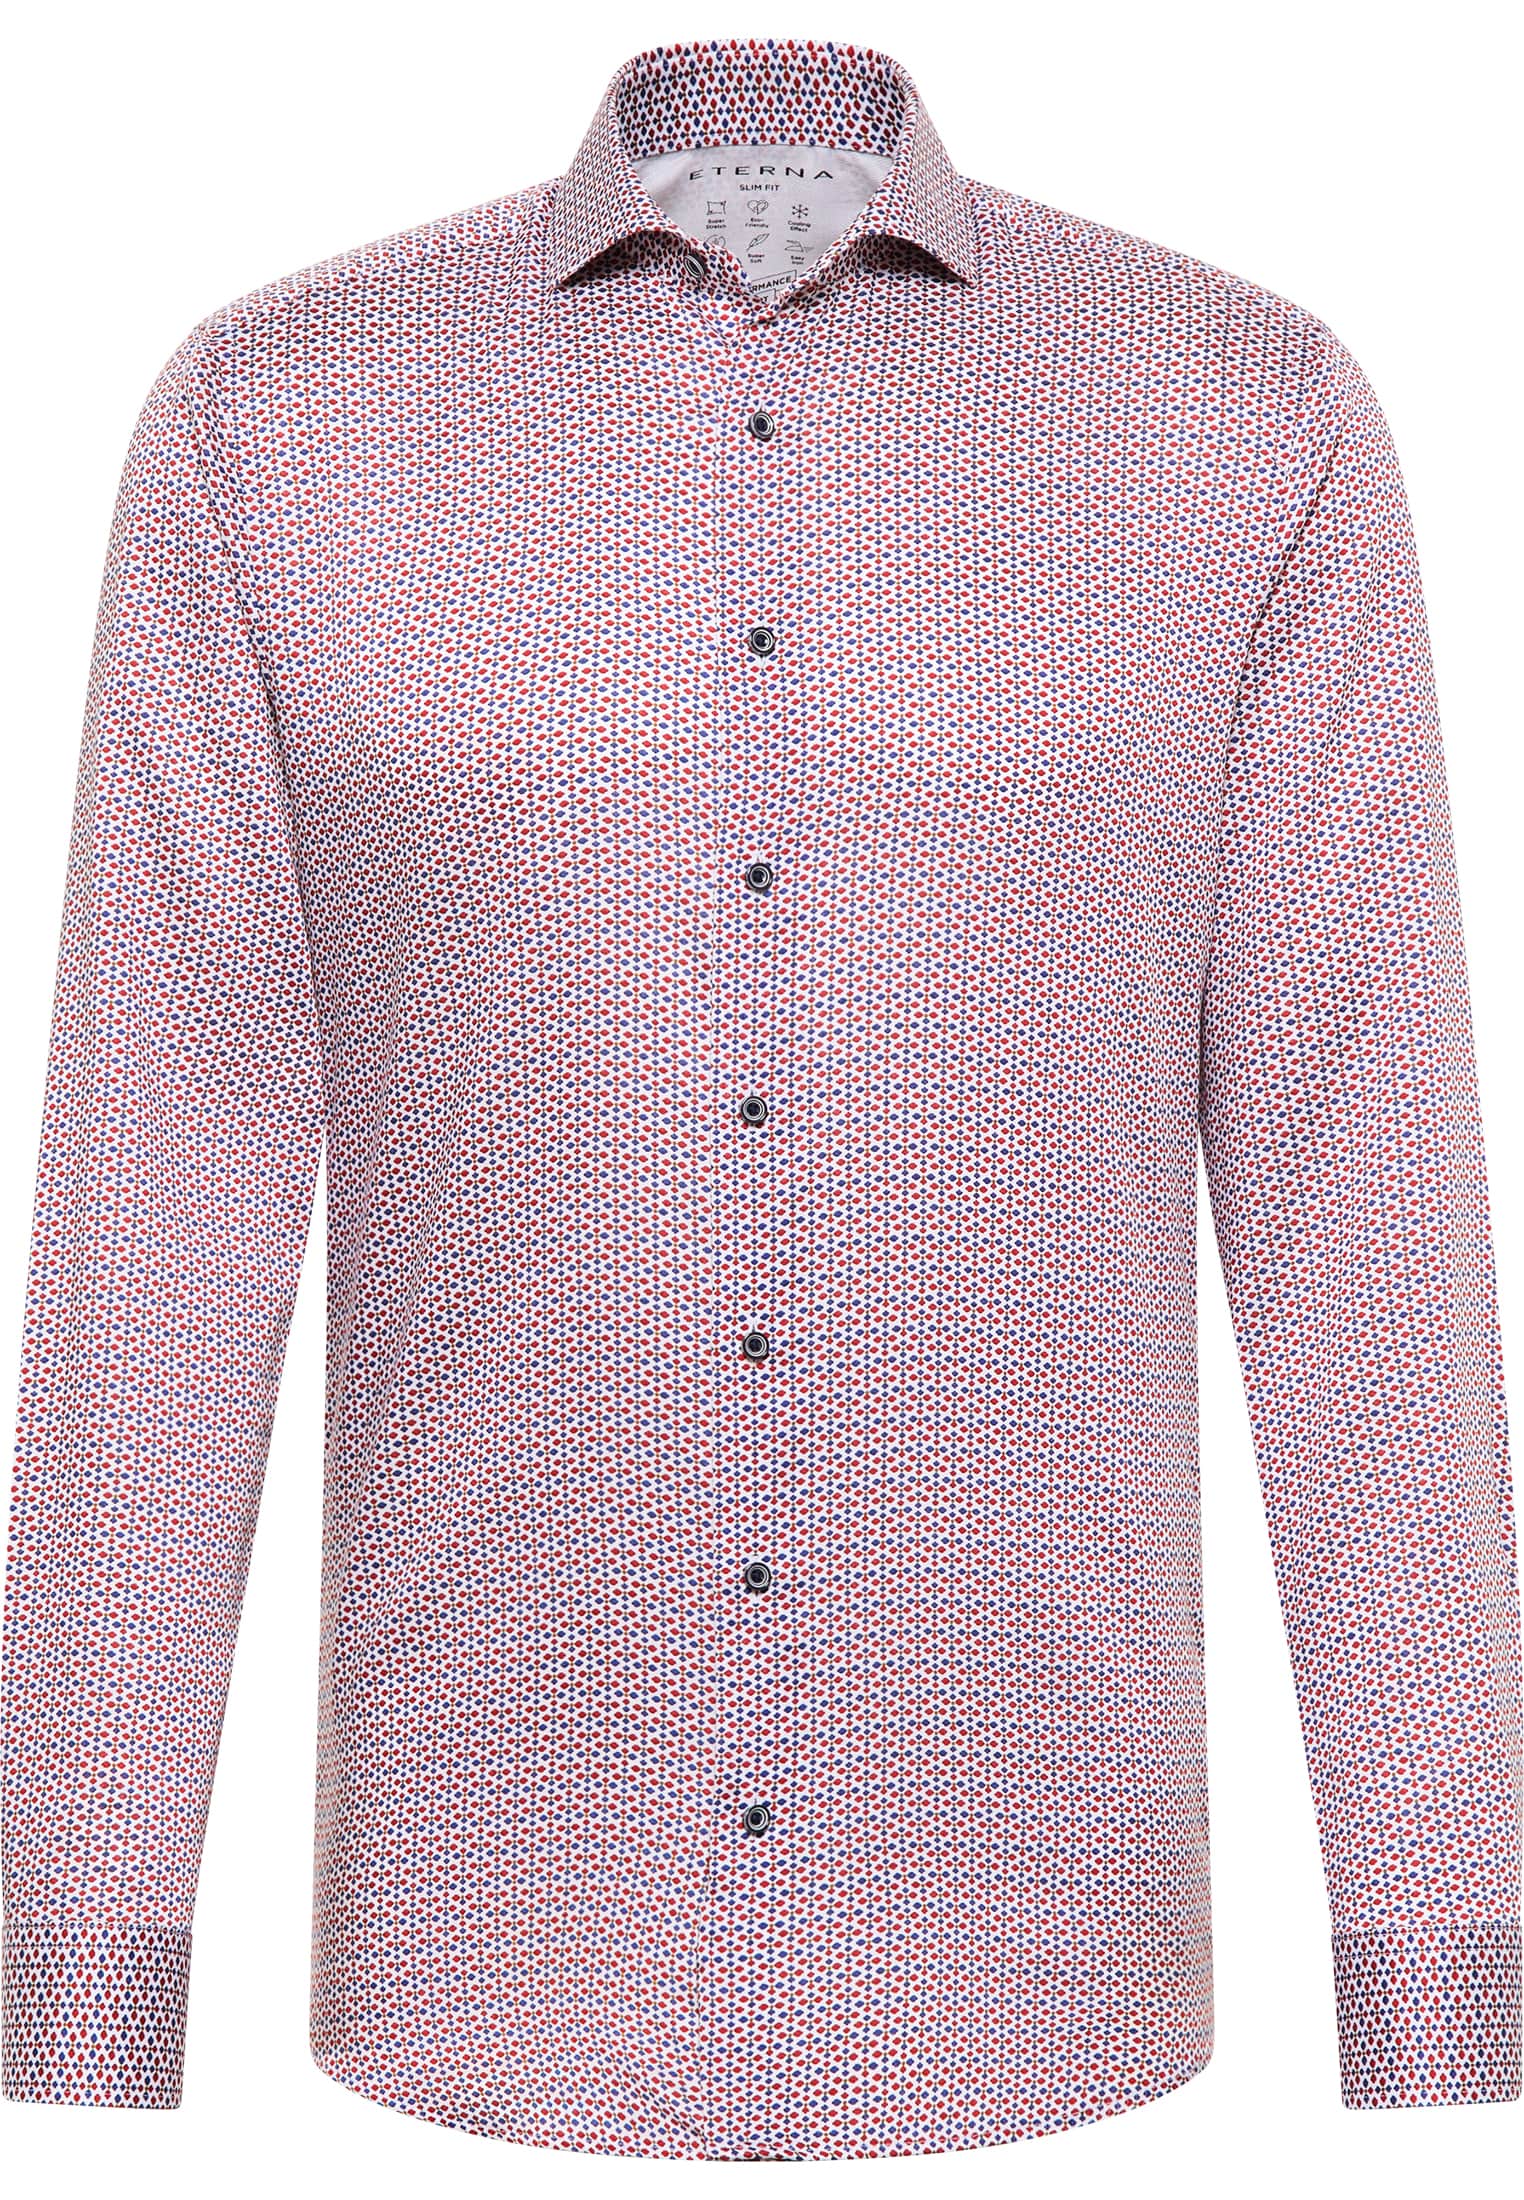 SLIM FIT Performance Shirt in red printed